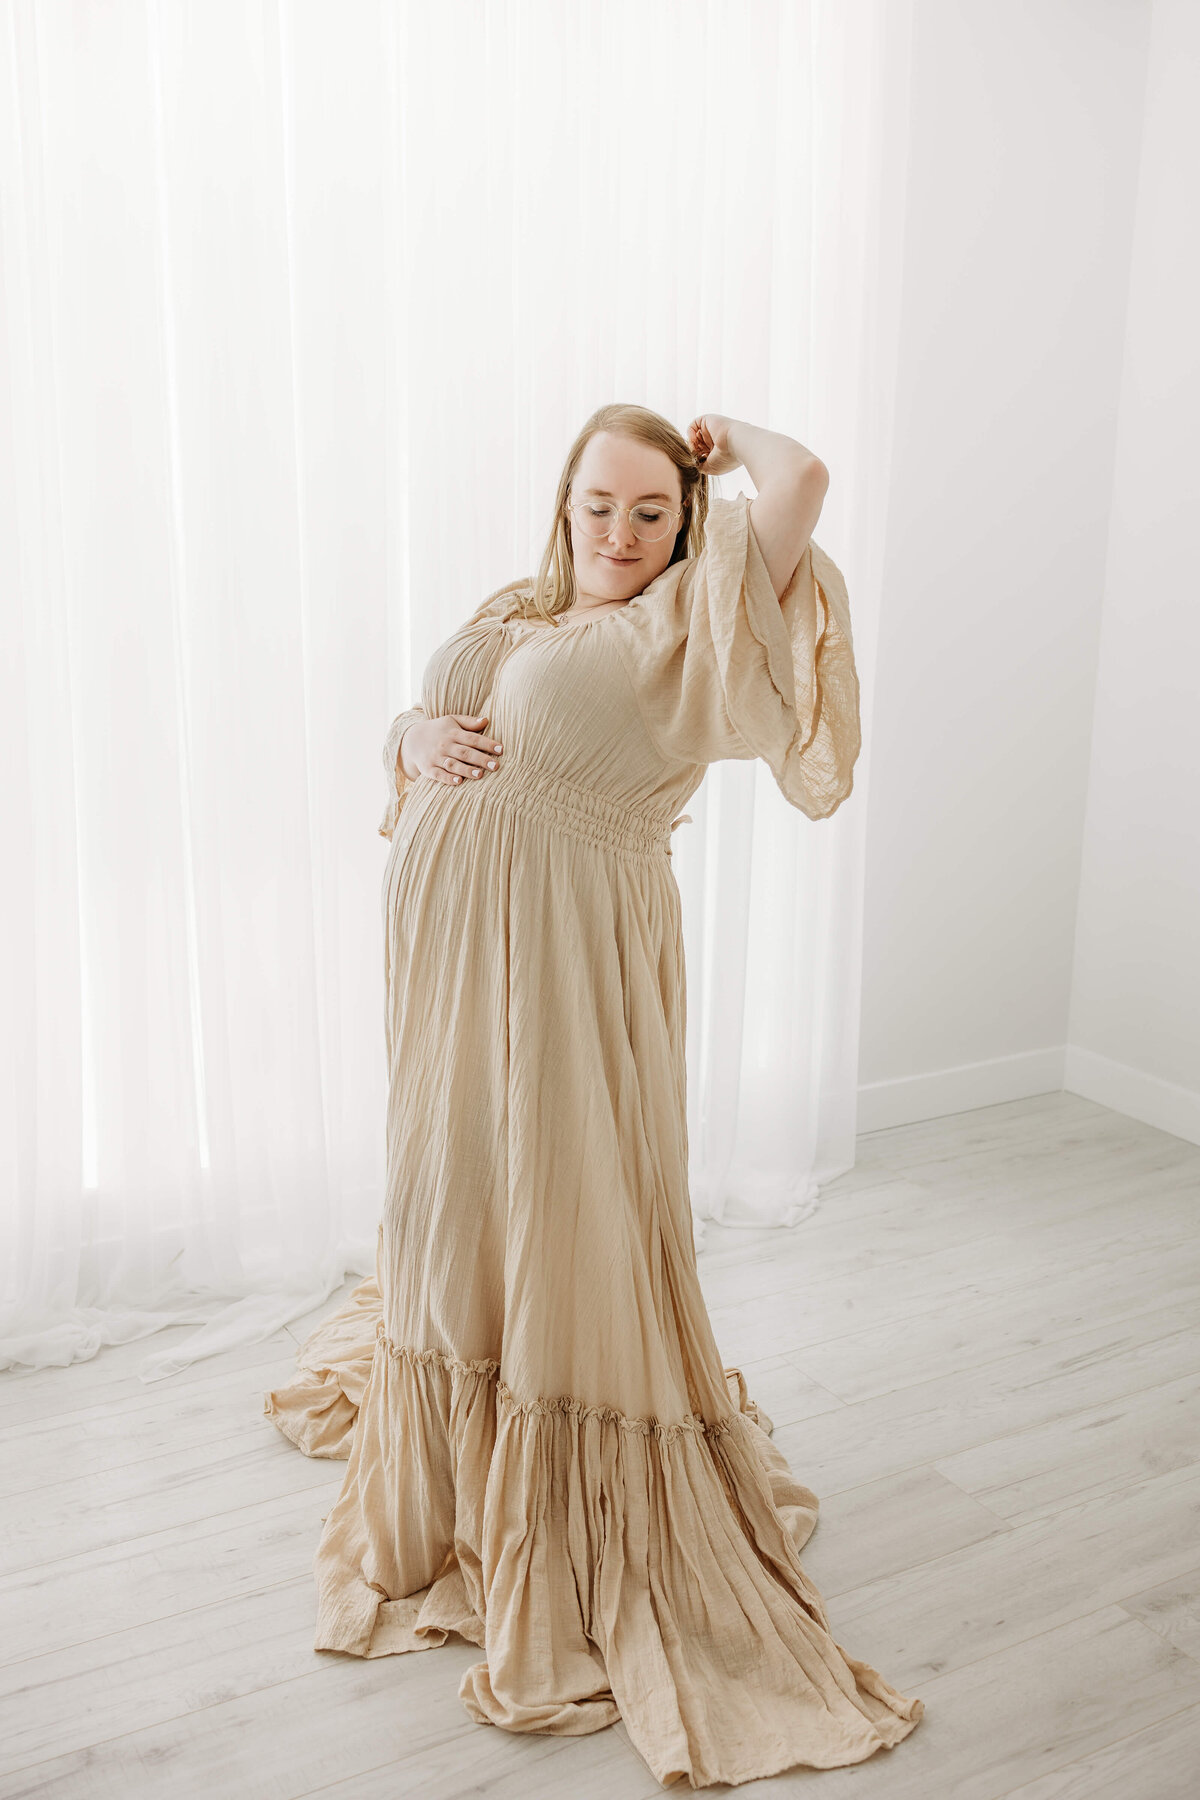 Pregnant woman in Luci Levon Photography studio maternity portraits in beige dress